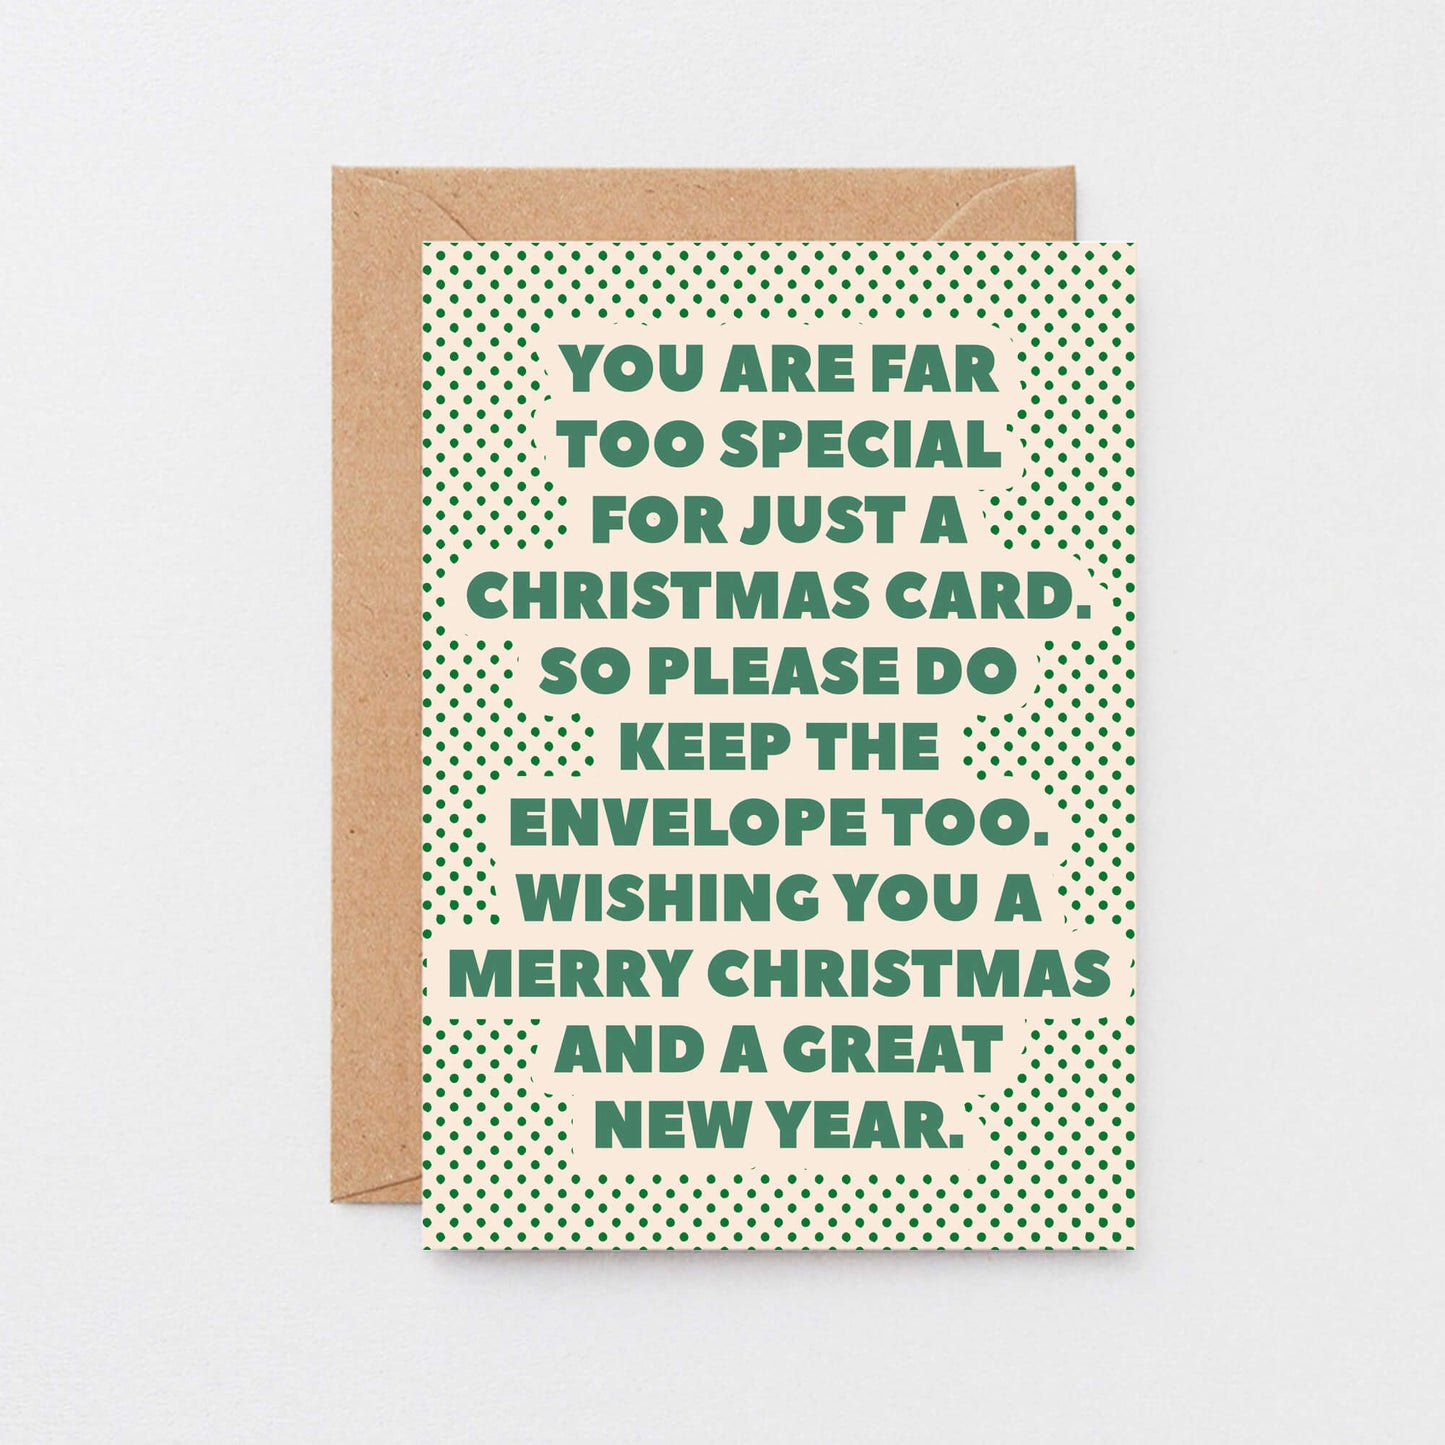 Christmas Card by SixElevenCreations. Card reads You are far too special for just a Christmas card. So please do keep the envelope too. Wishing you a Merry Christmas and a great new year. Product Code SEC0071A6